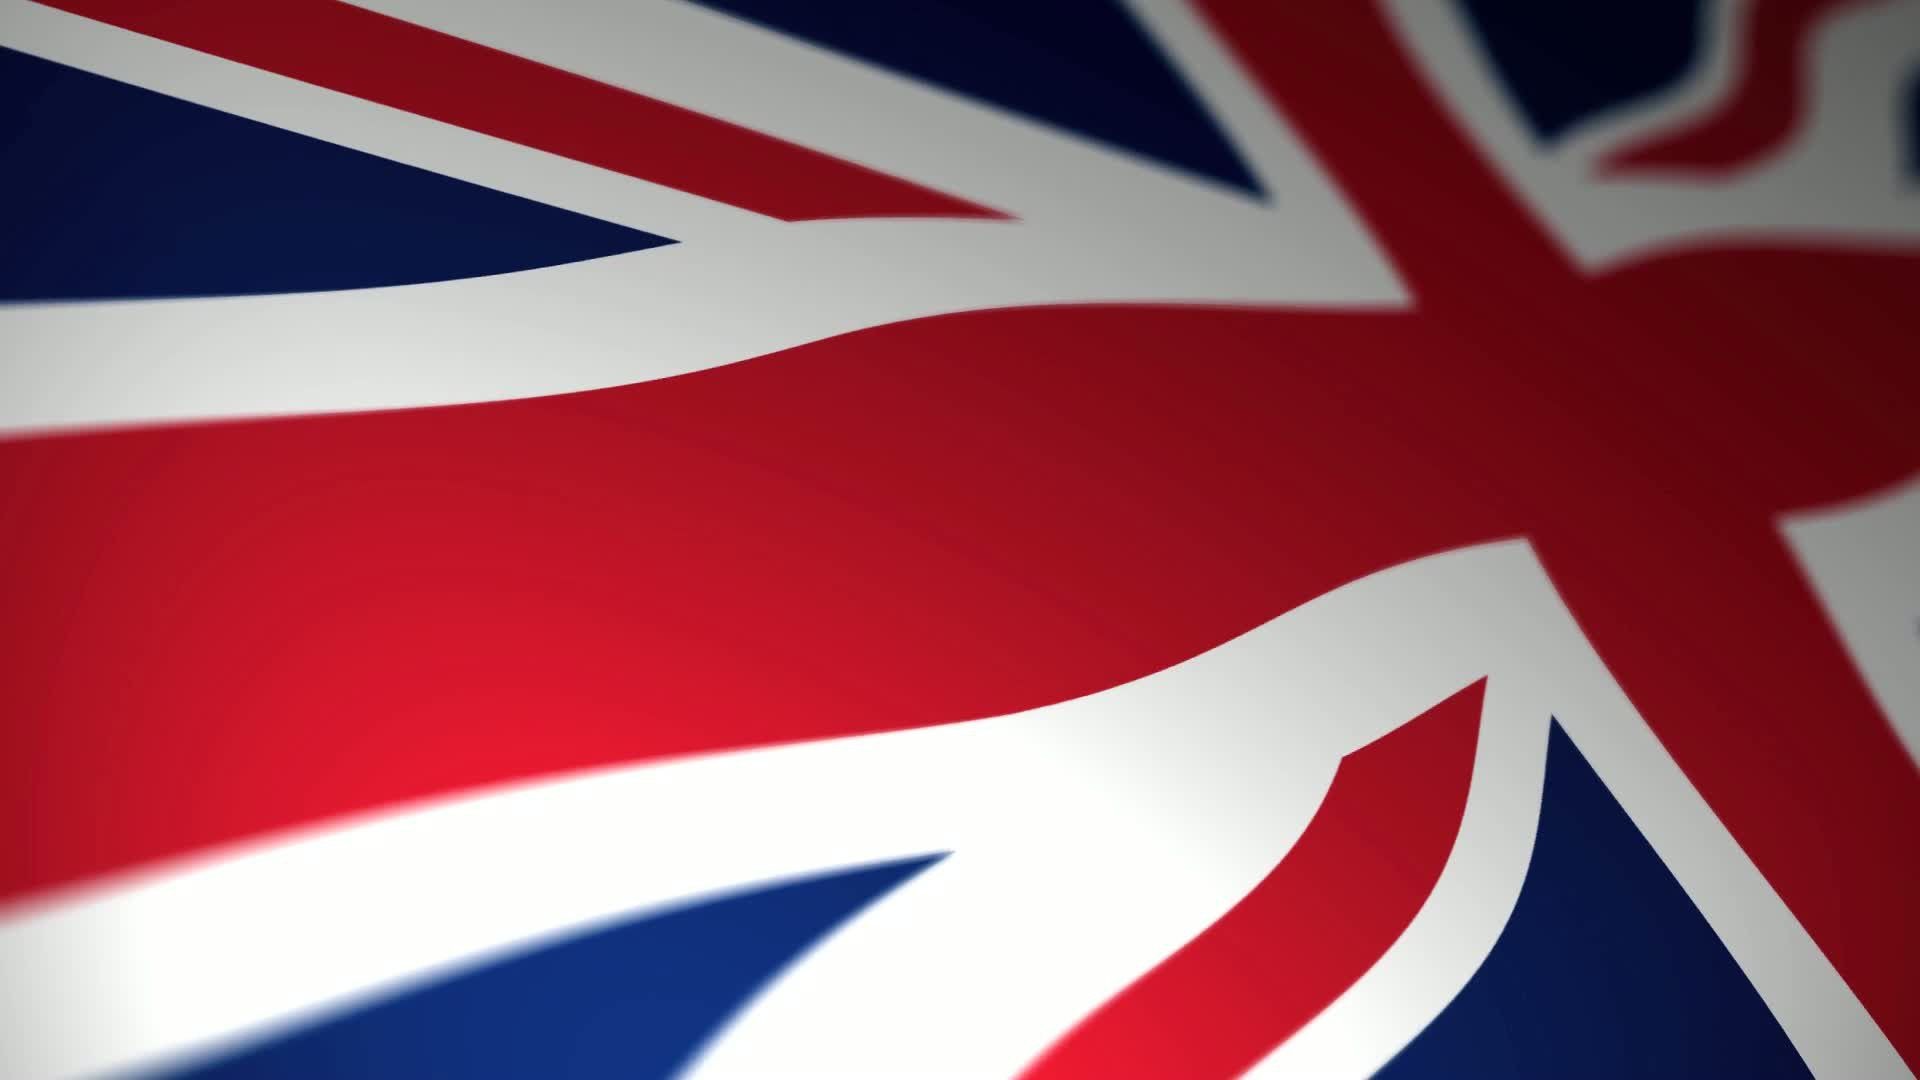 1920x1080 HD p England Wallpaper Backgrounds For Free | HD Wallpapers | Pinterest | Uk  flag wallpaper, 3d wallpaper and Flags